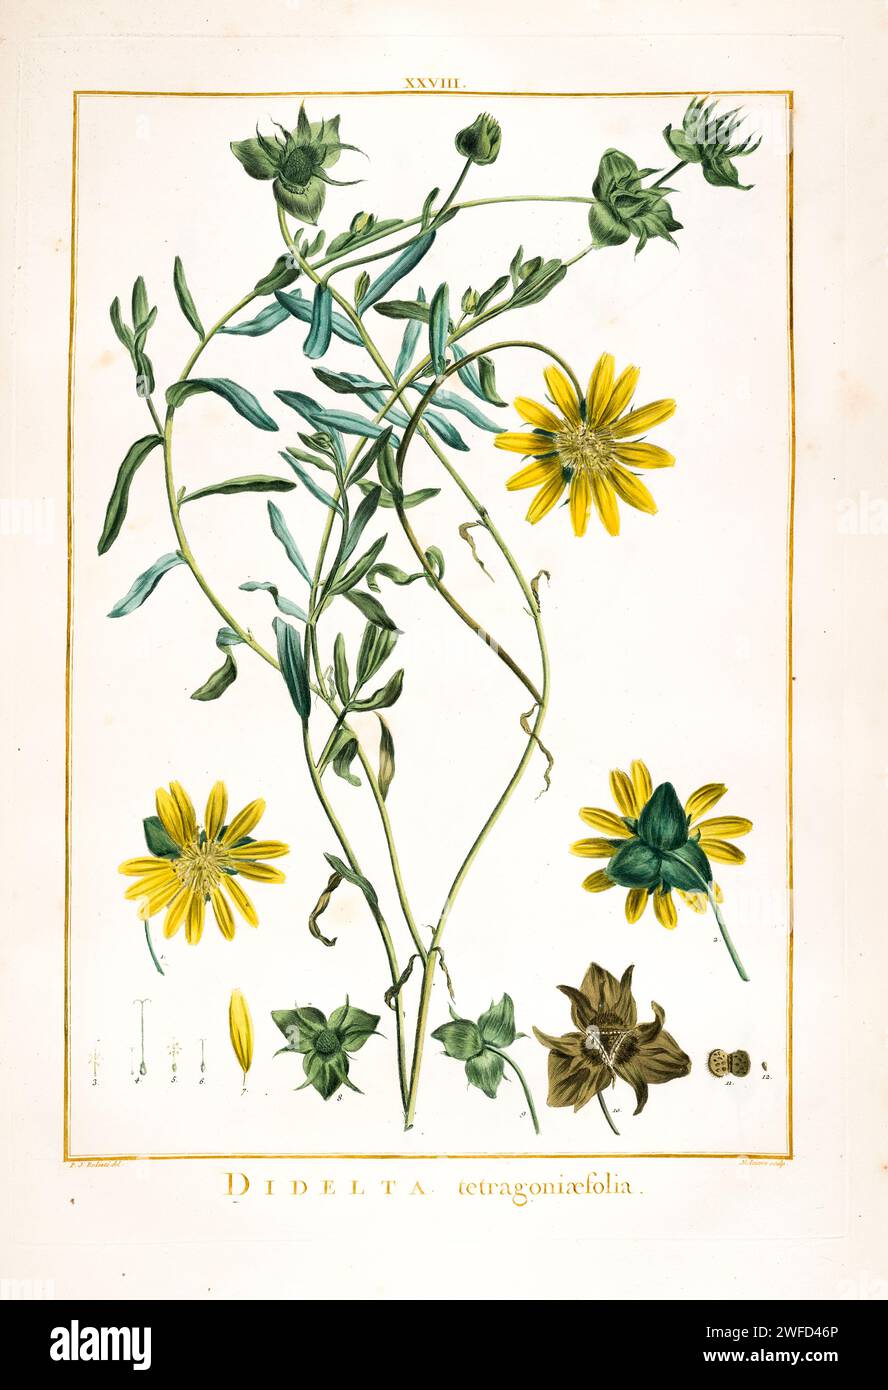 Didelta tetragoniaefolia (synonym of Didelta carnosa), an image created by by Pierre-Joseph Redouté that was published in Stirpes Novae aut Minus Cognitae (1784) by Charles Louis L'Héritier de Brutelle. Stock Photo